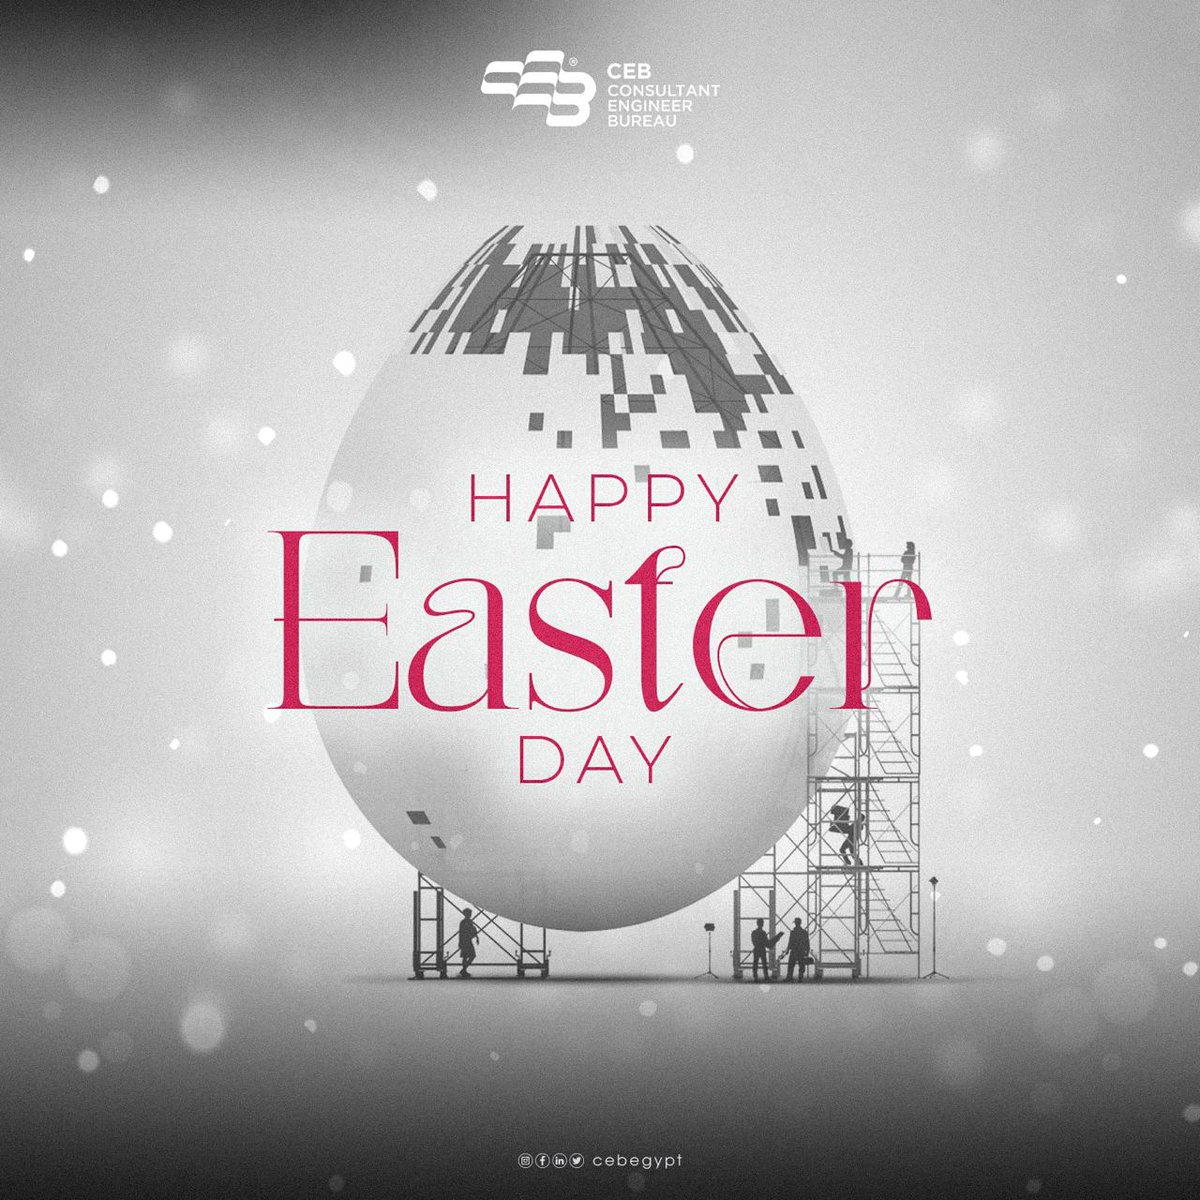 Happy Easter! May the joy of this special day fill your heart with love and happiness.💚

#march2024 #ceb #HappyEaster2024 #cebconsultancy #consultant_engineer_bureau #From_concept_to_creation